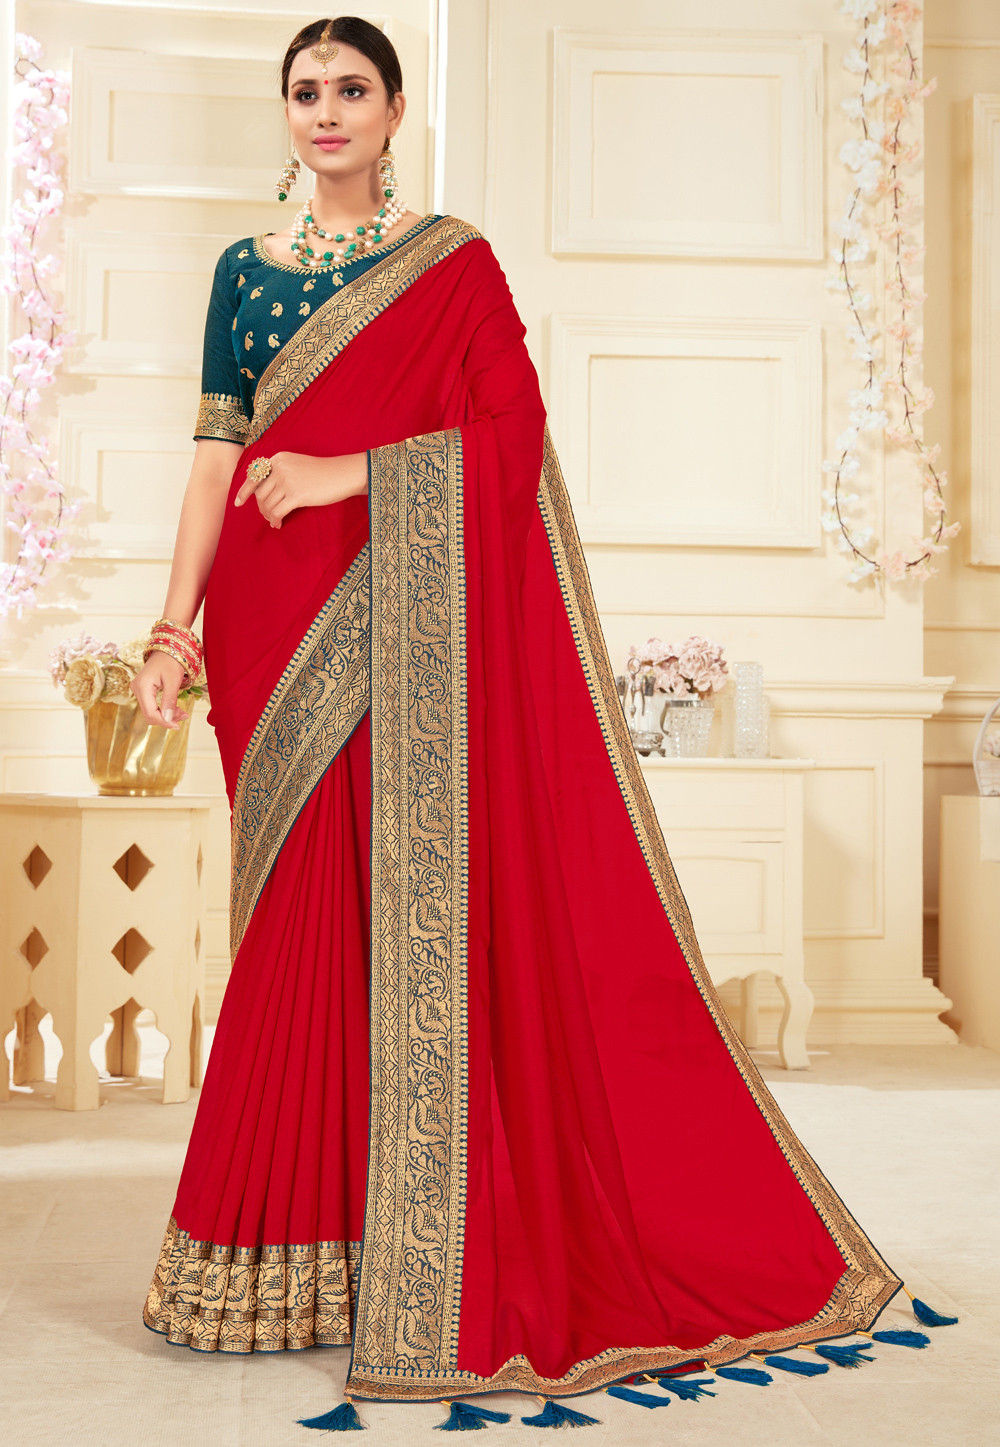 Details 73+ red saree with golden border